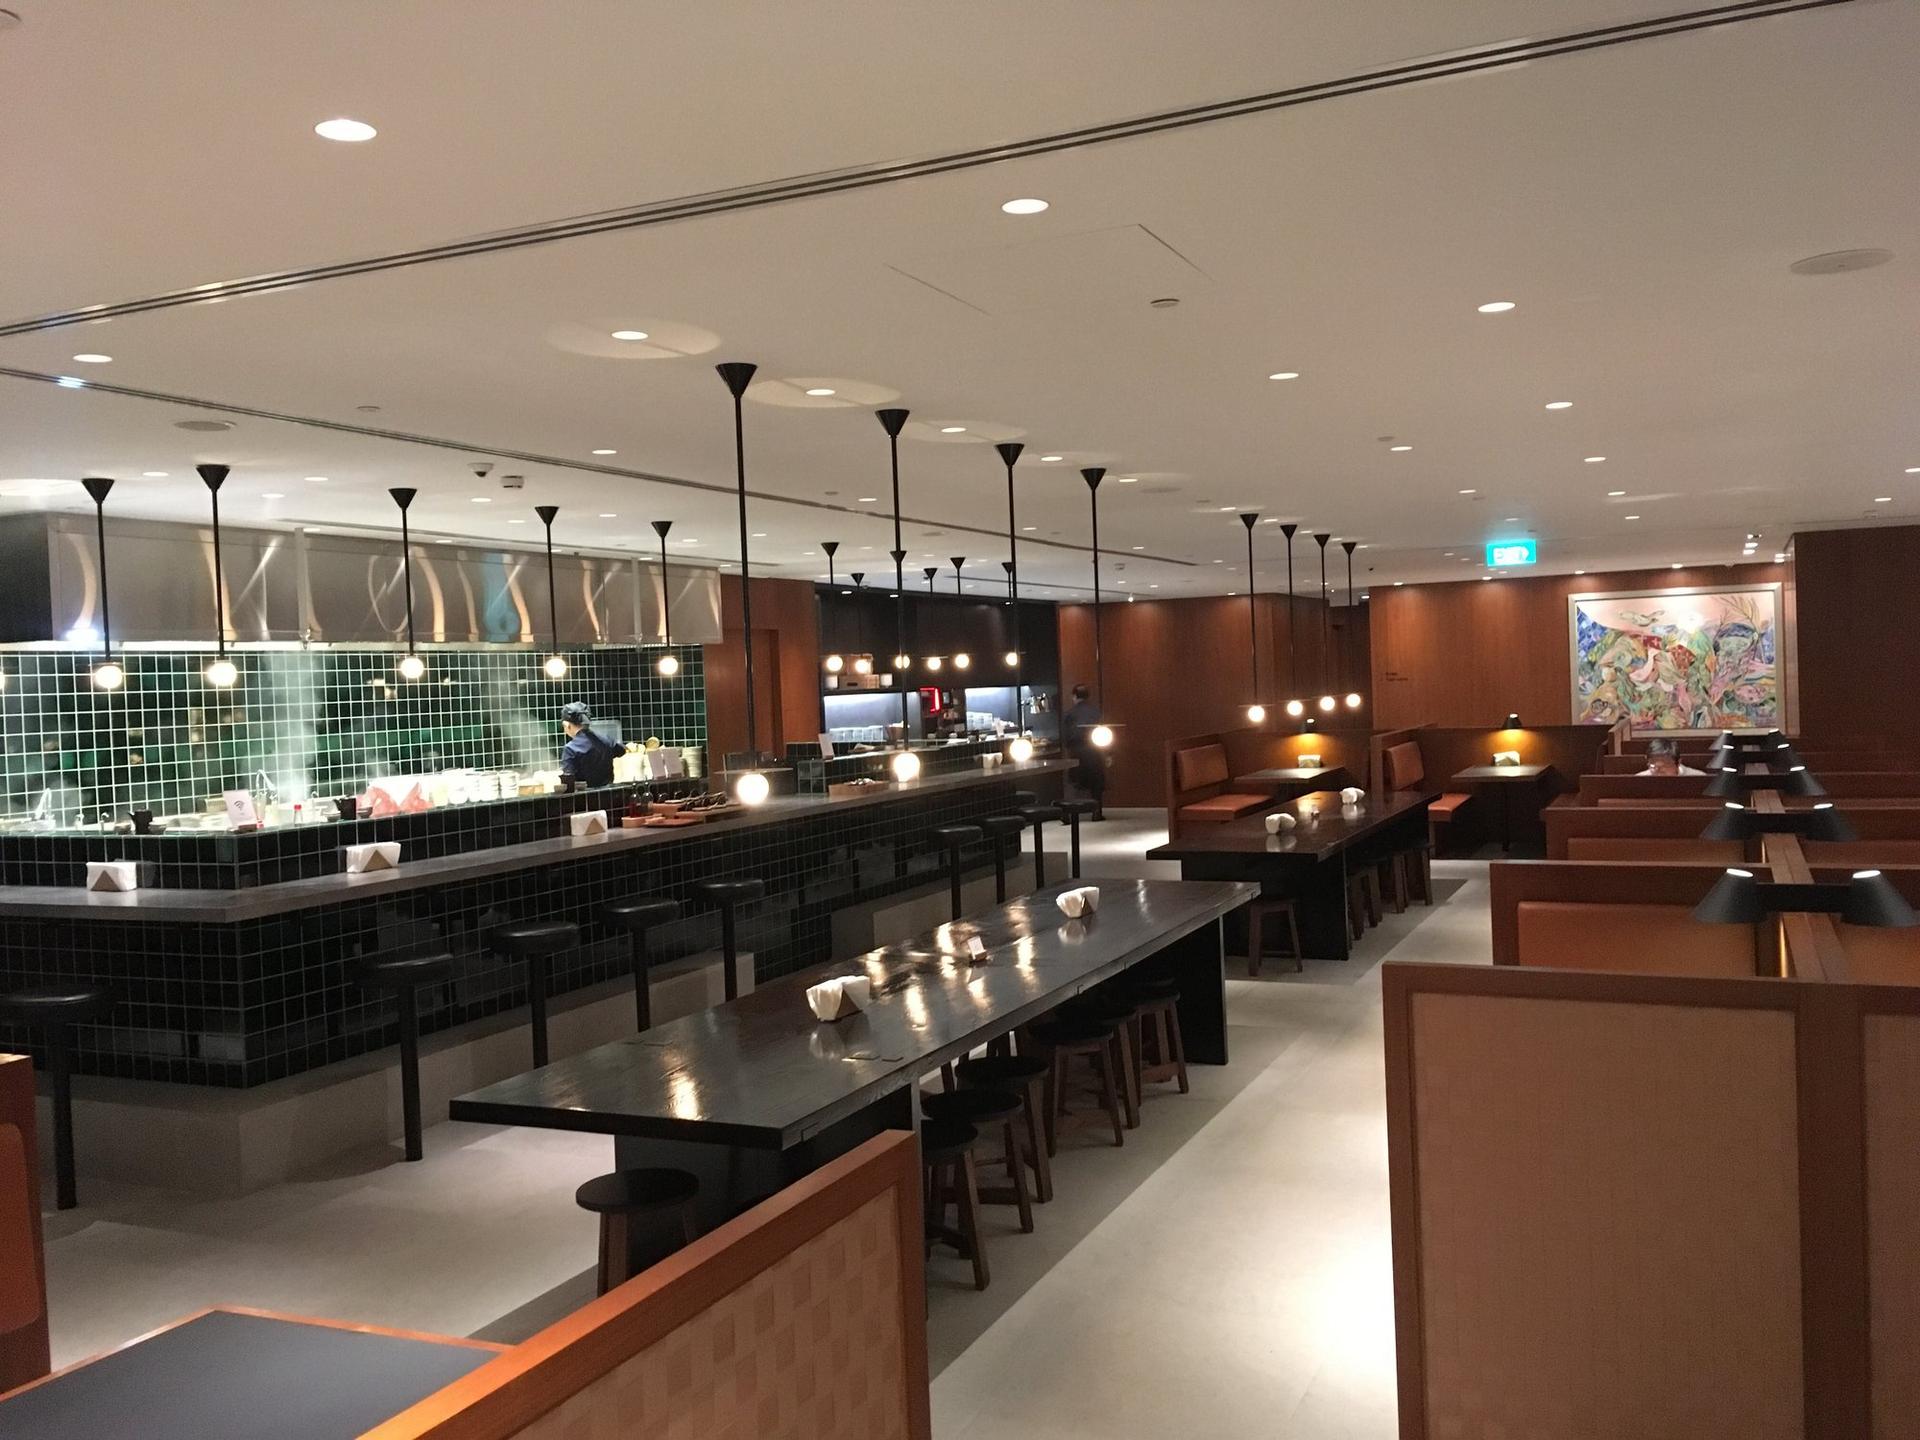 Cathay Pacific Lounge image 10 of 60